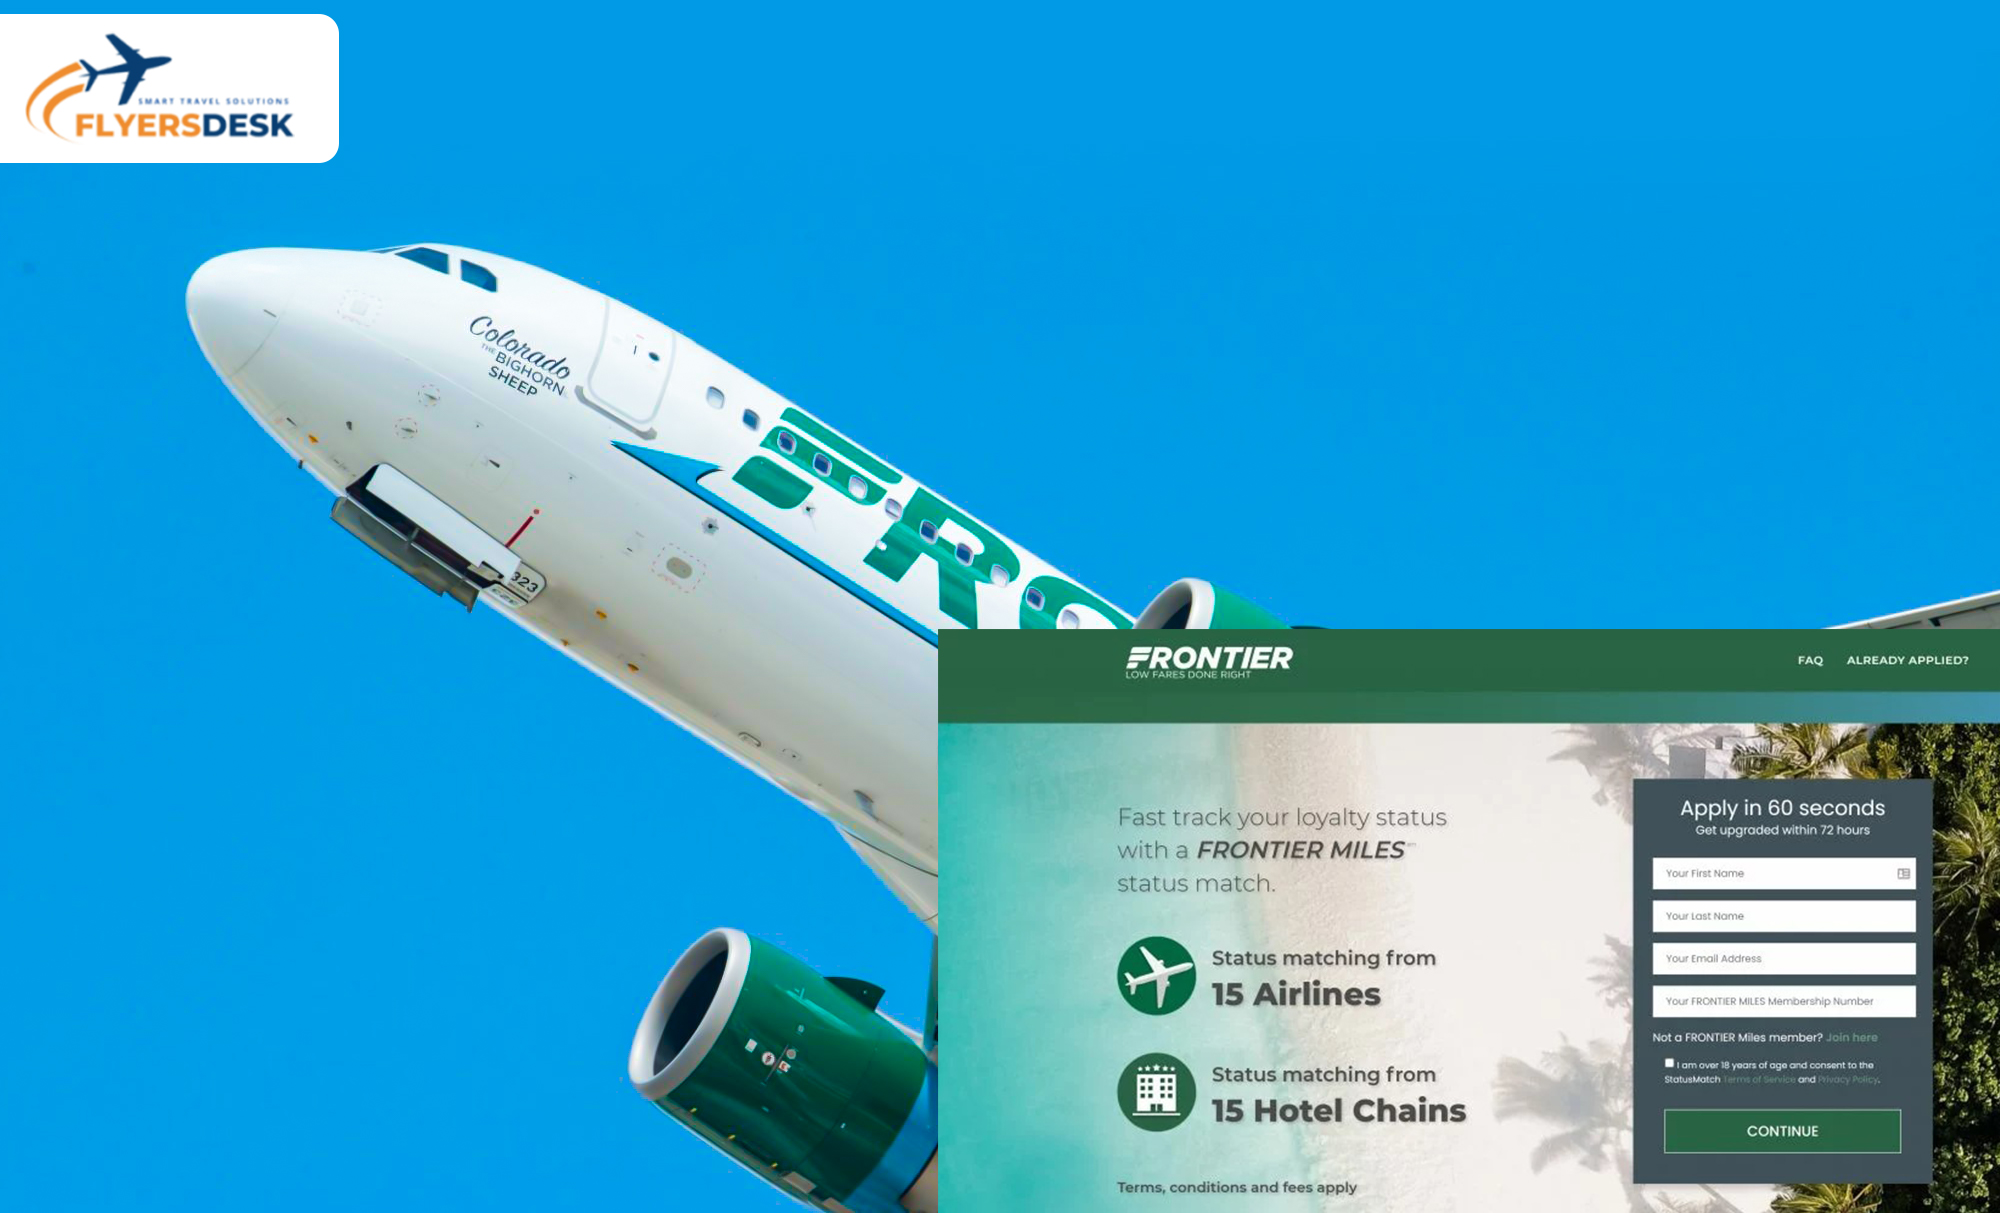 How To Book a Flight On Frontier Airlines